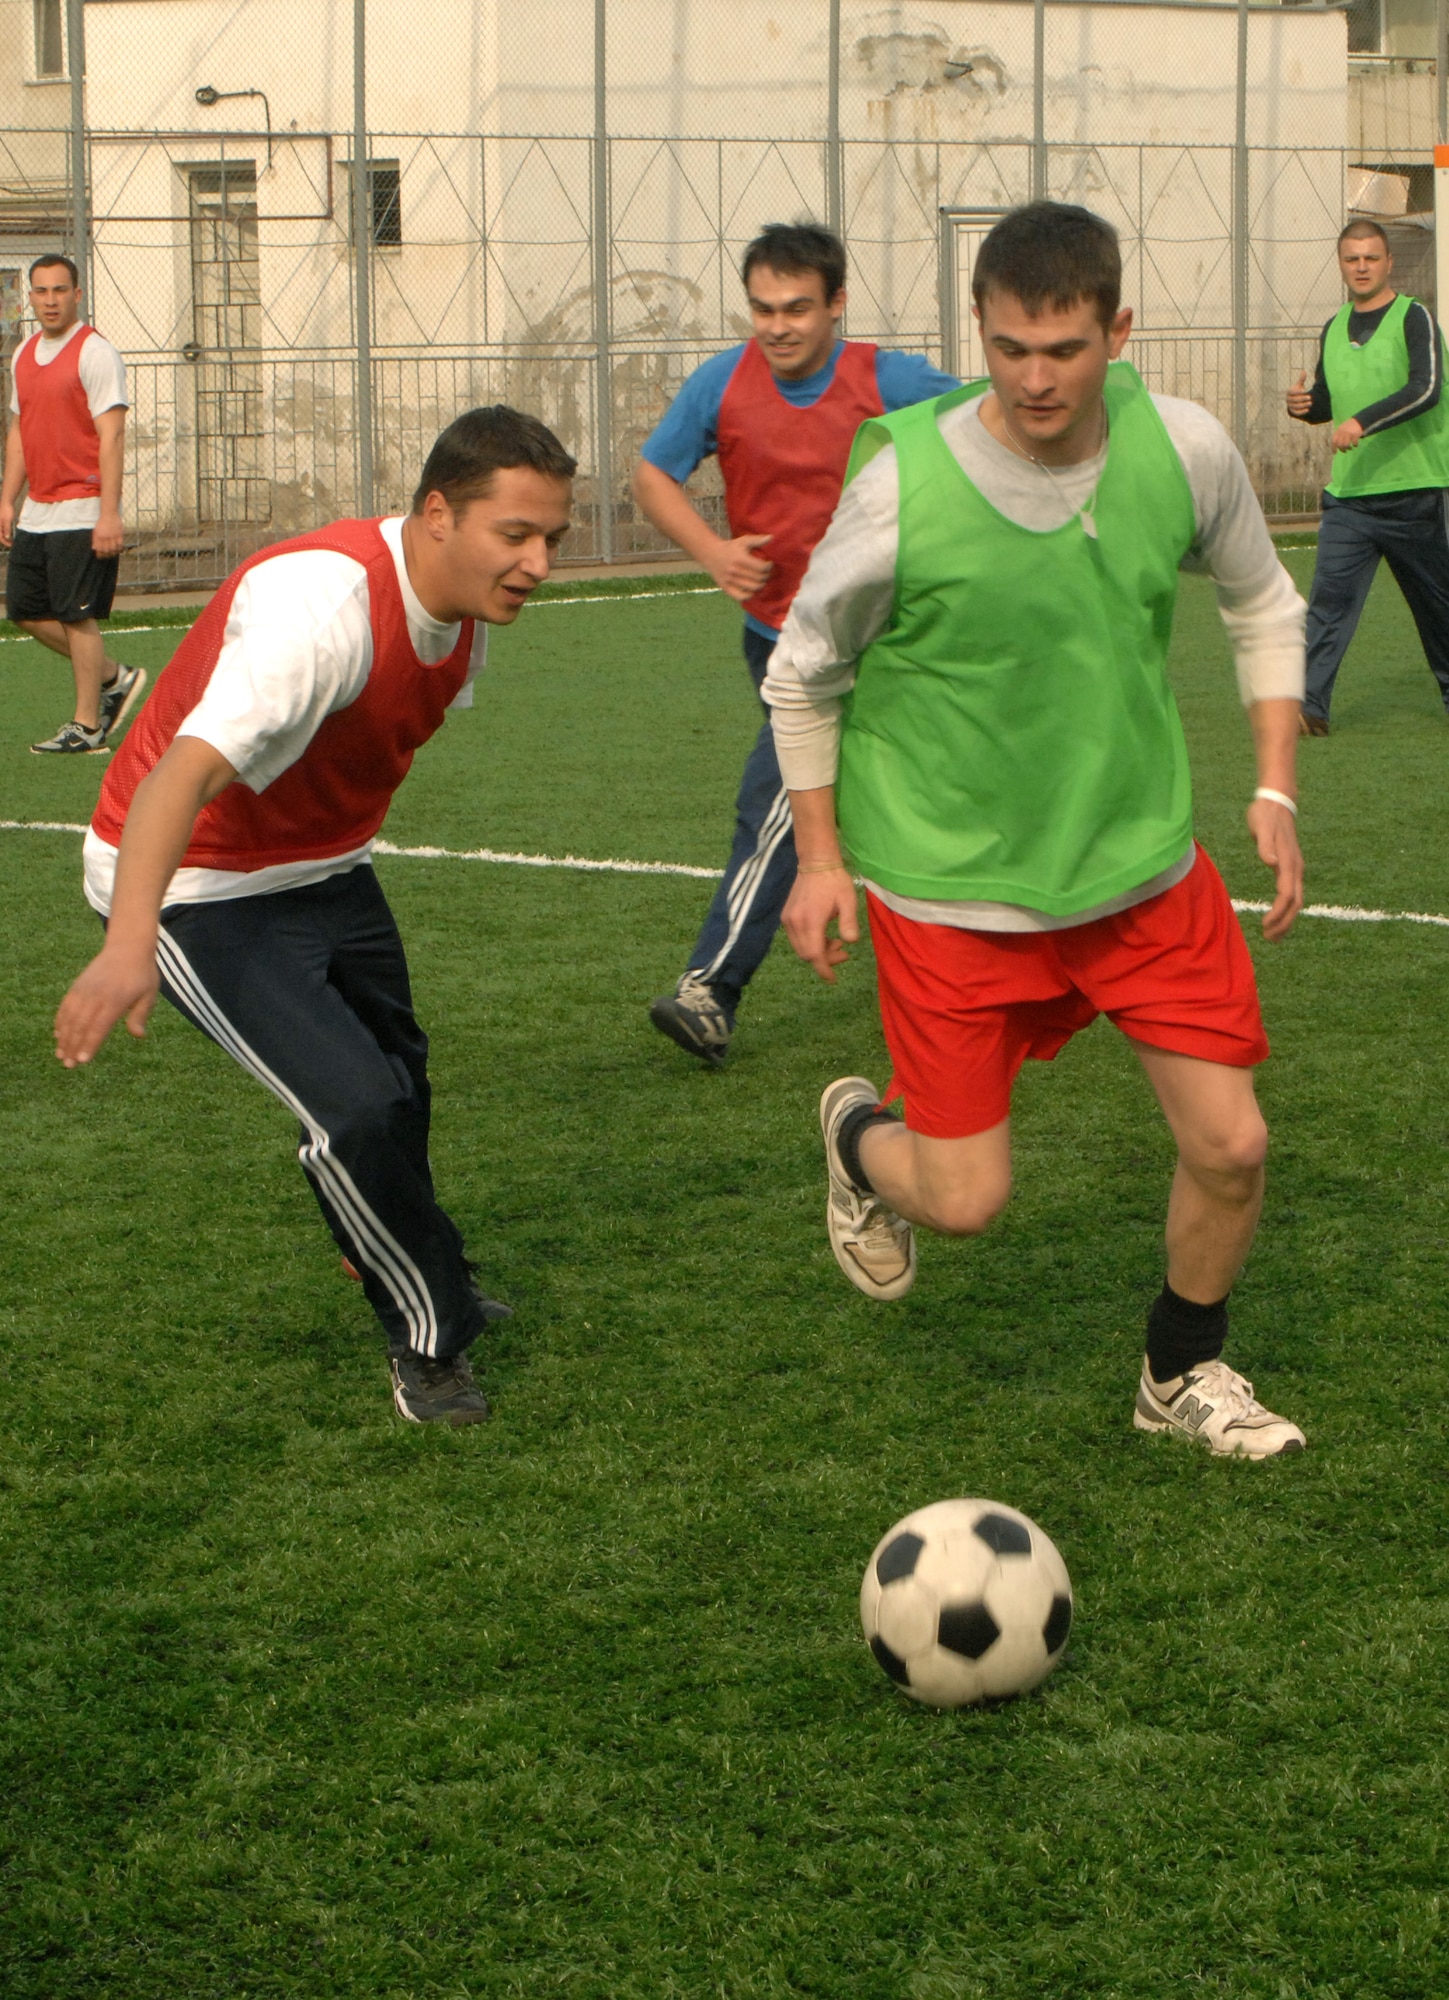 CAMPIA TURZII, Romania -- U.S. Air Force members enjoy a game of soccer with their Romanian counterparts after a day of work here March 29, 2008. The Airmen are deployed here as part of the U.S. military's support to the NATO Summit. The U.S. Air Force augmented NATO and Romanian forces, ensuring the security of the airspace above Bucharest.  (U.S. Air Force photo by Senior Airman Teresa M. Hawkins)